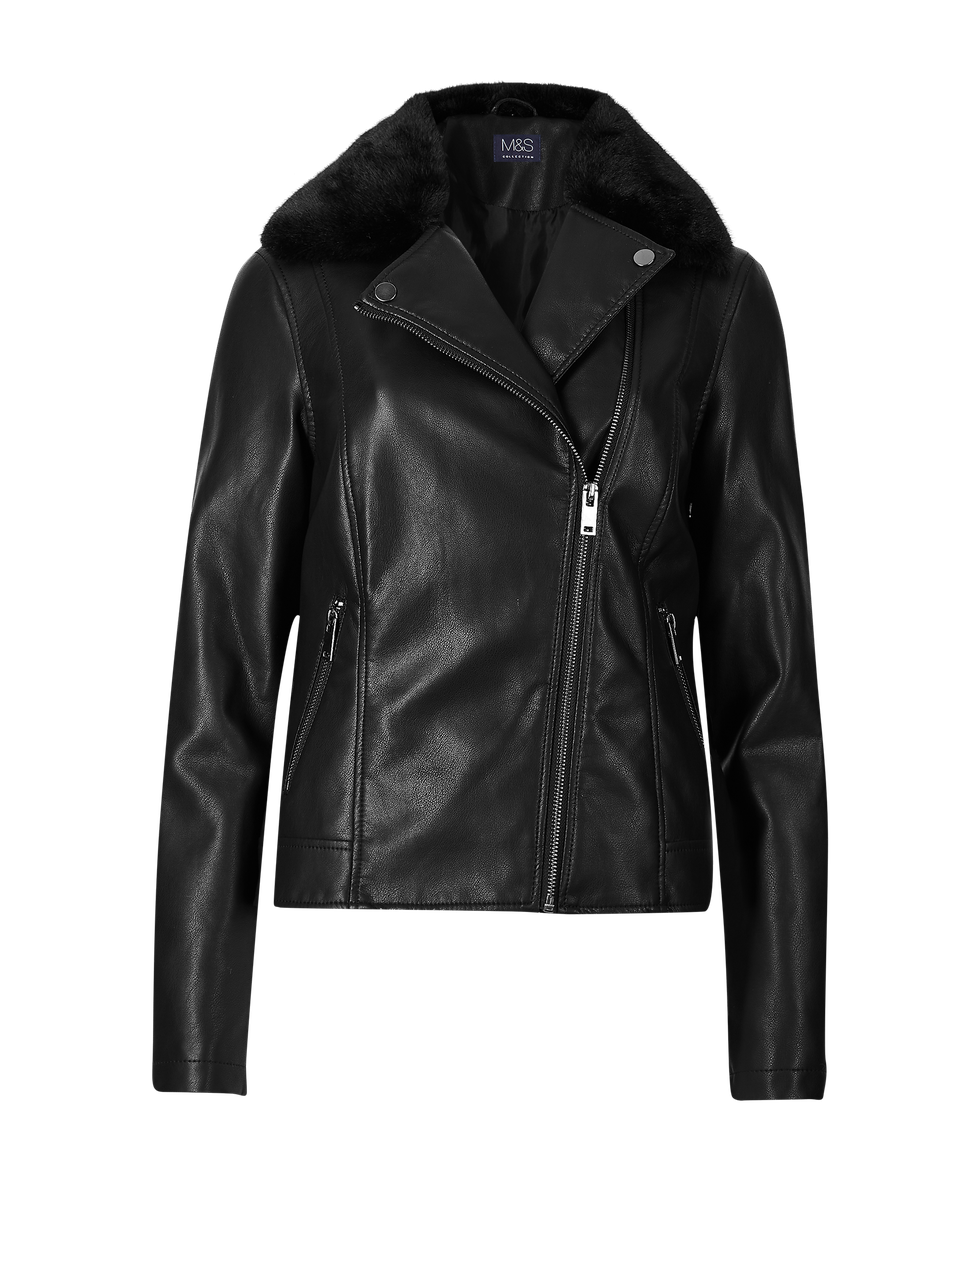 Jacket, Clothing, Leather, Leather jacket, Outerwear, Sleeve, Textile, Collar, Top, Zipper, 